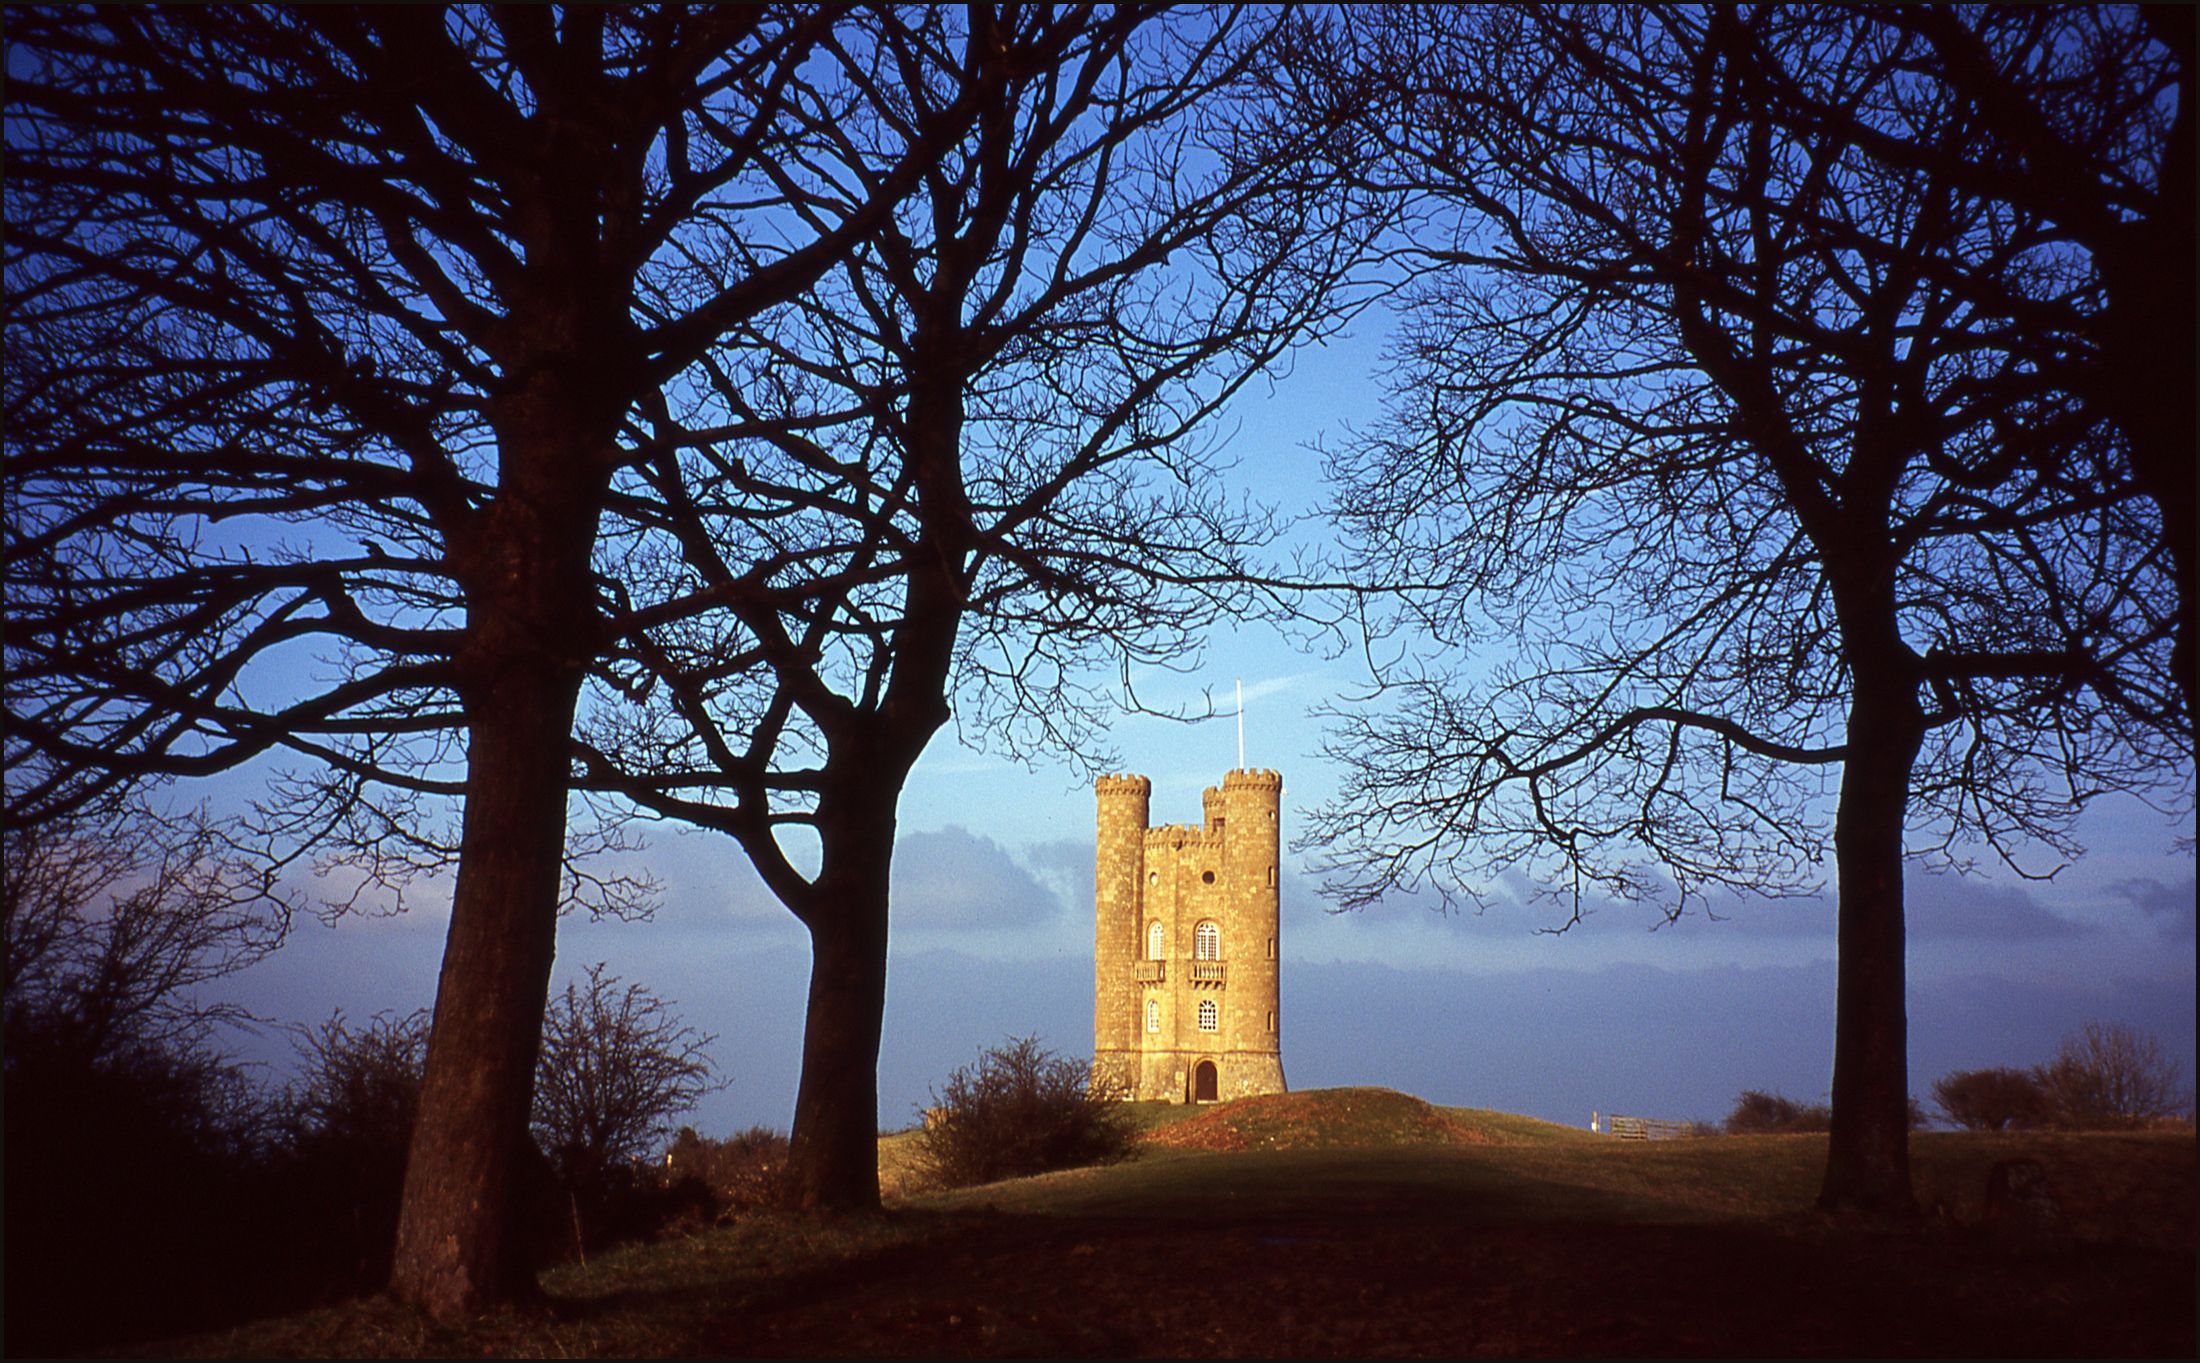 Broadway Tower, Worcestershire Wallpapers